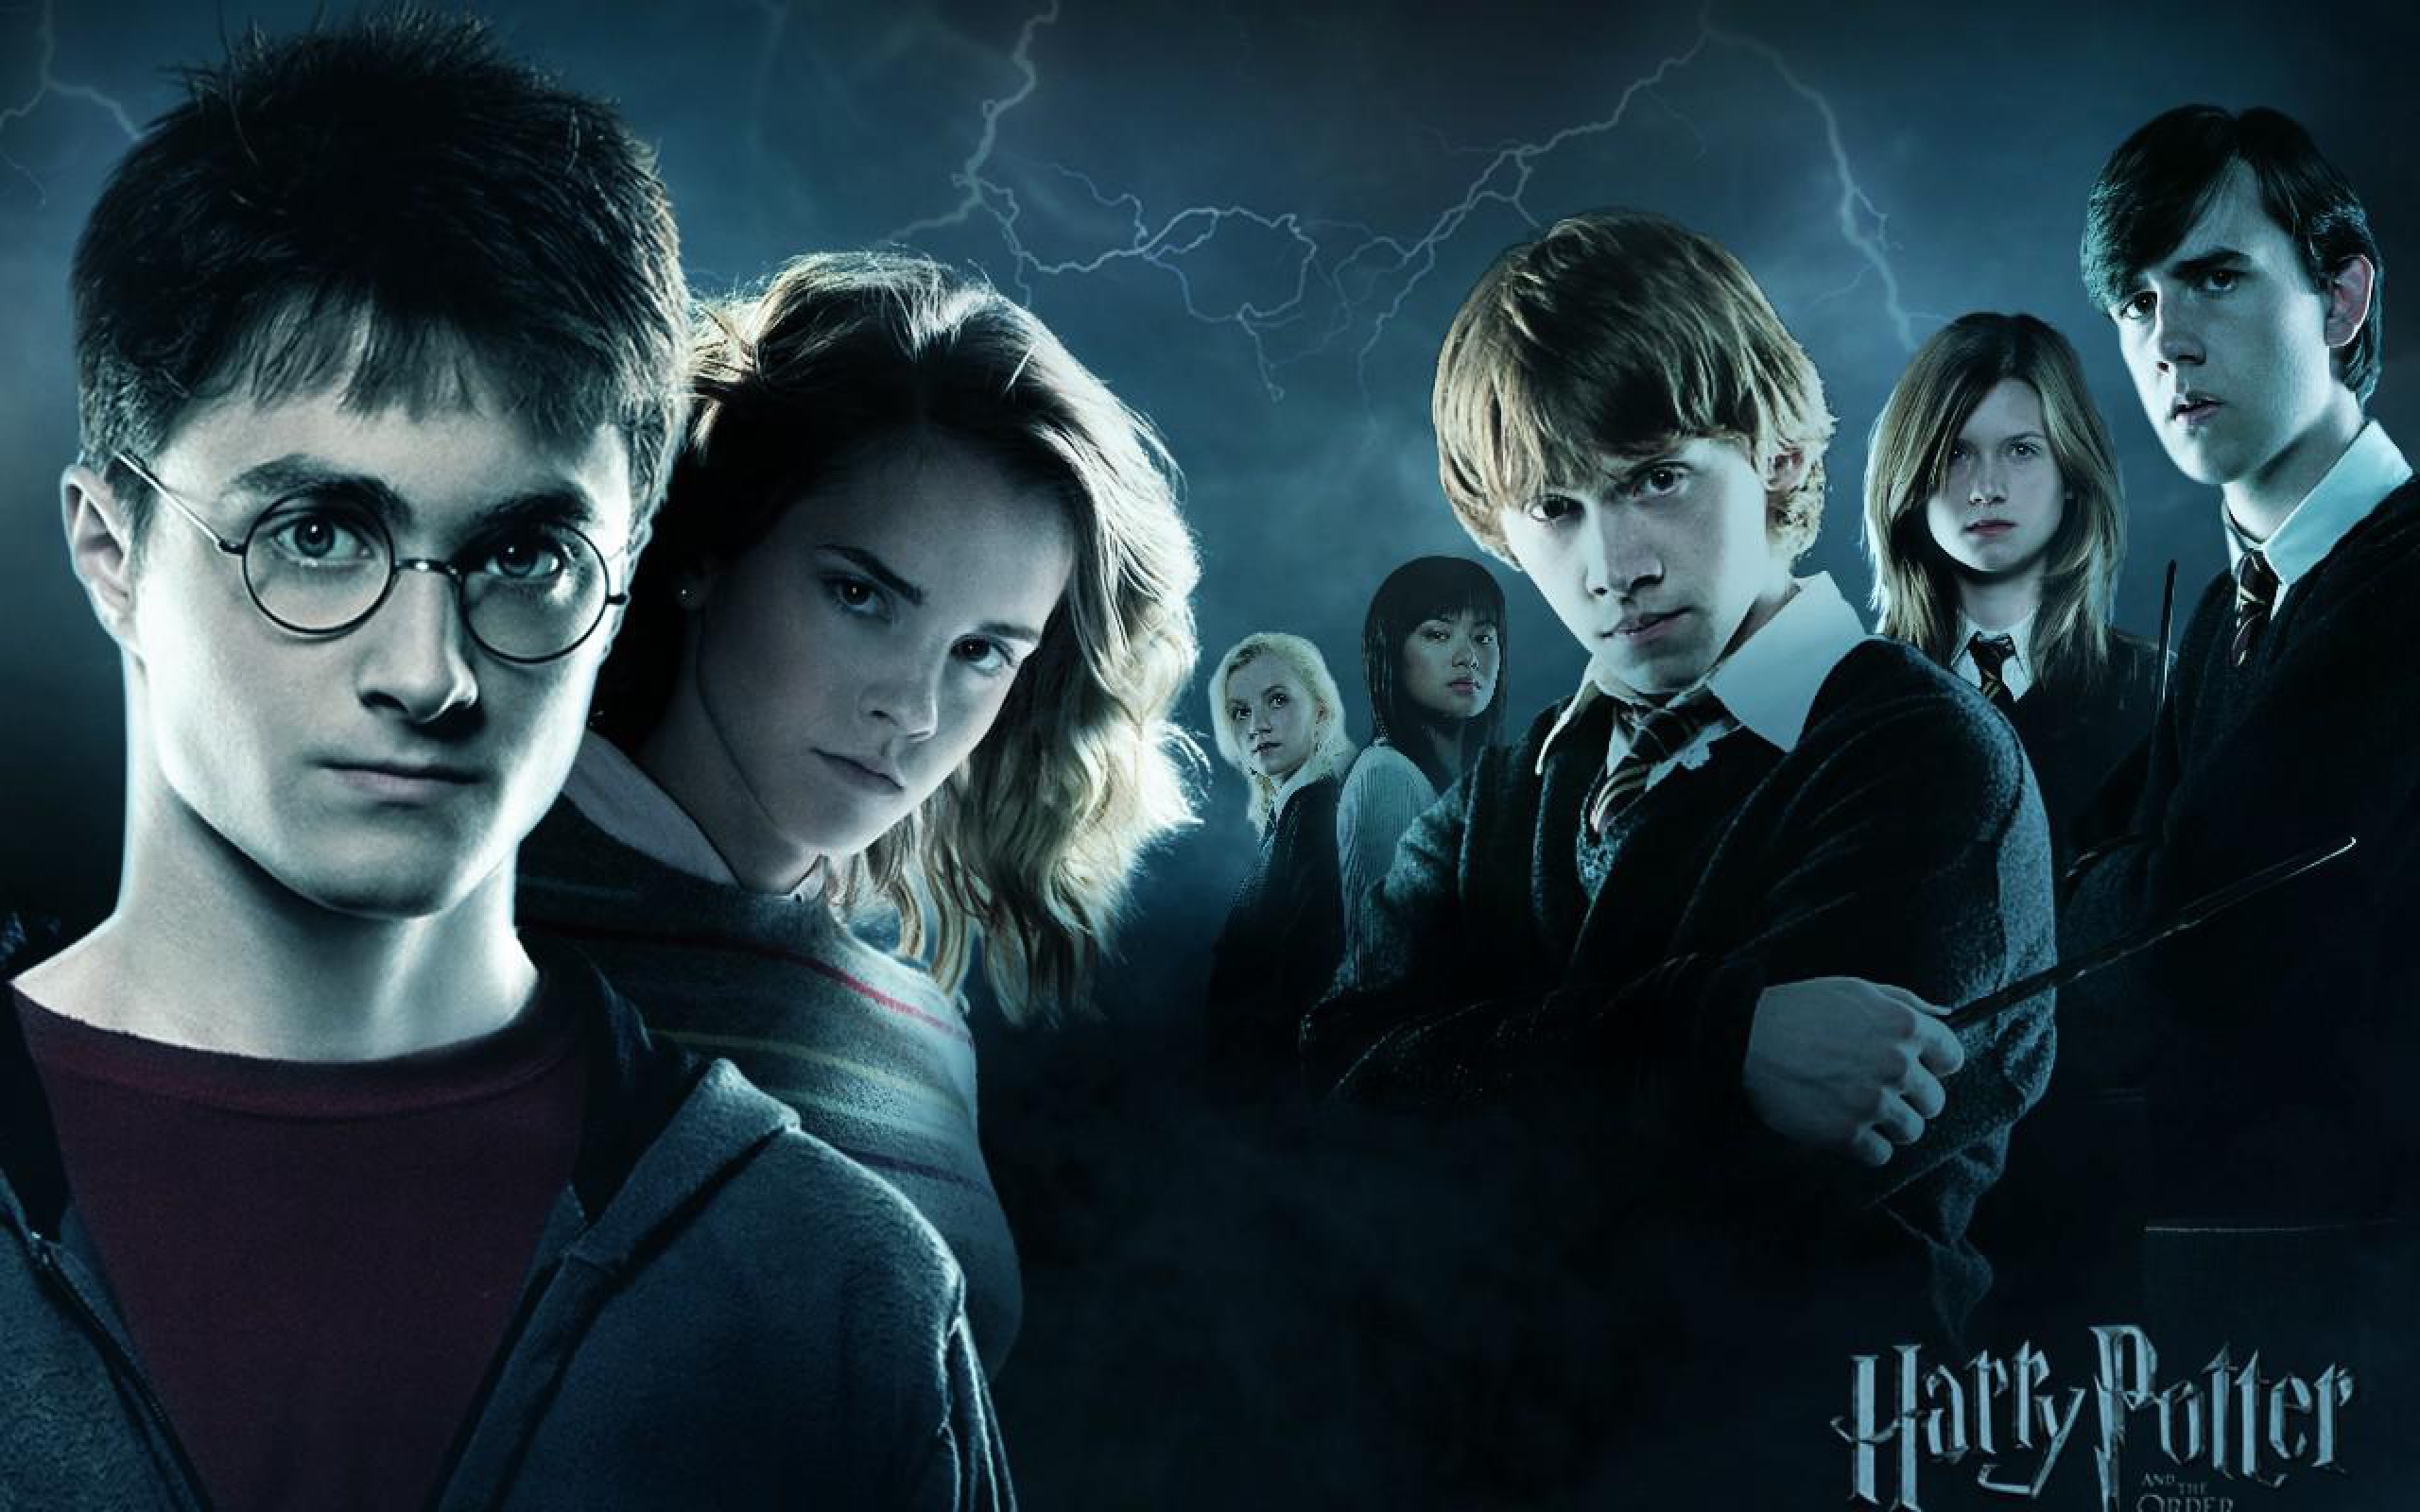 Harry Potter HD Wallpapers - HD Wallpapers Backgrounds of Your Choice